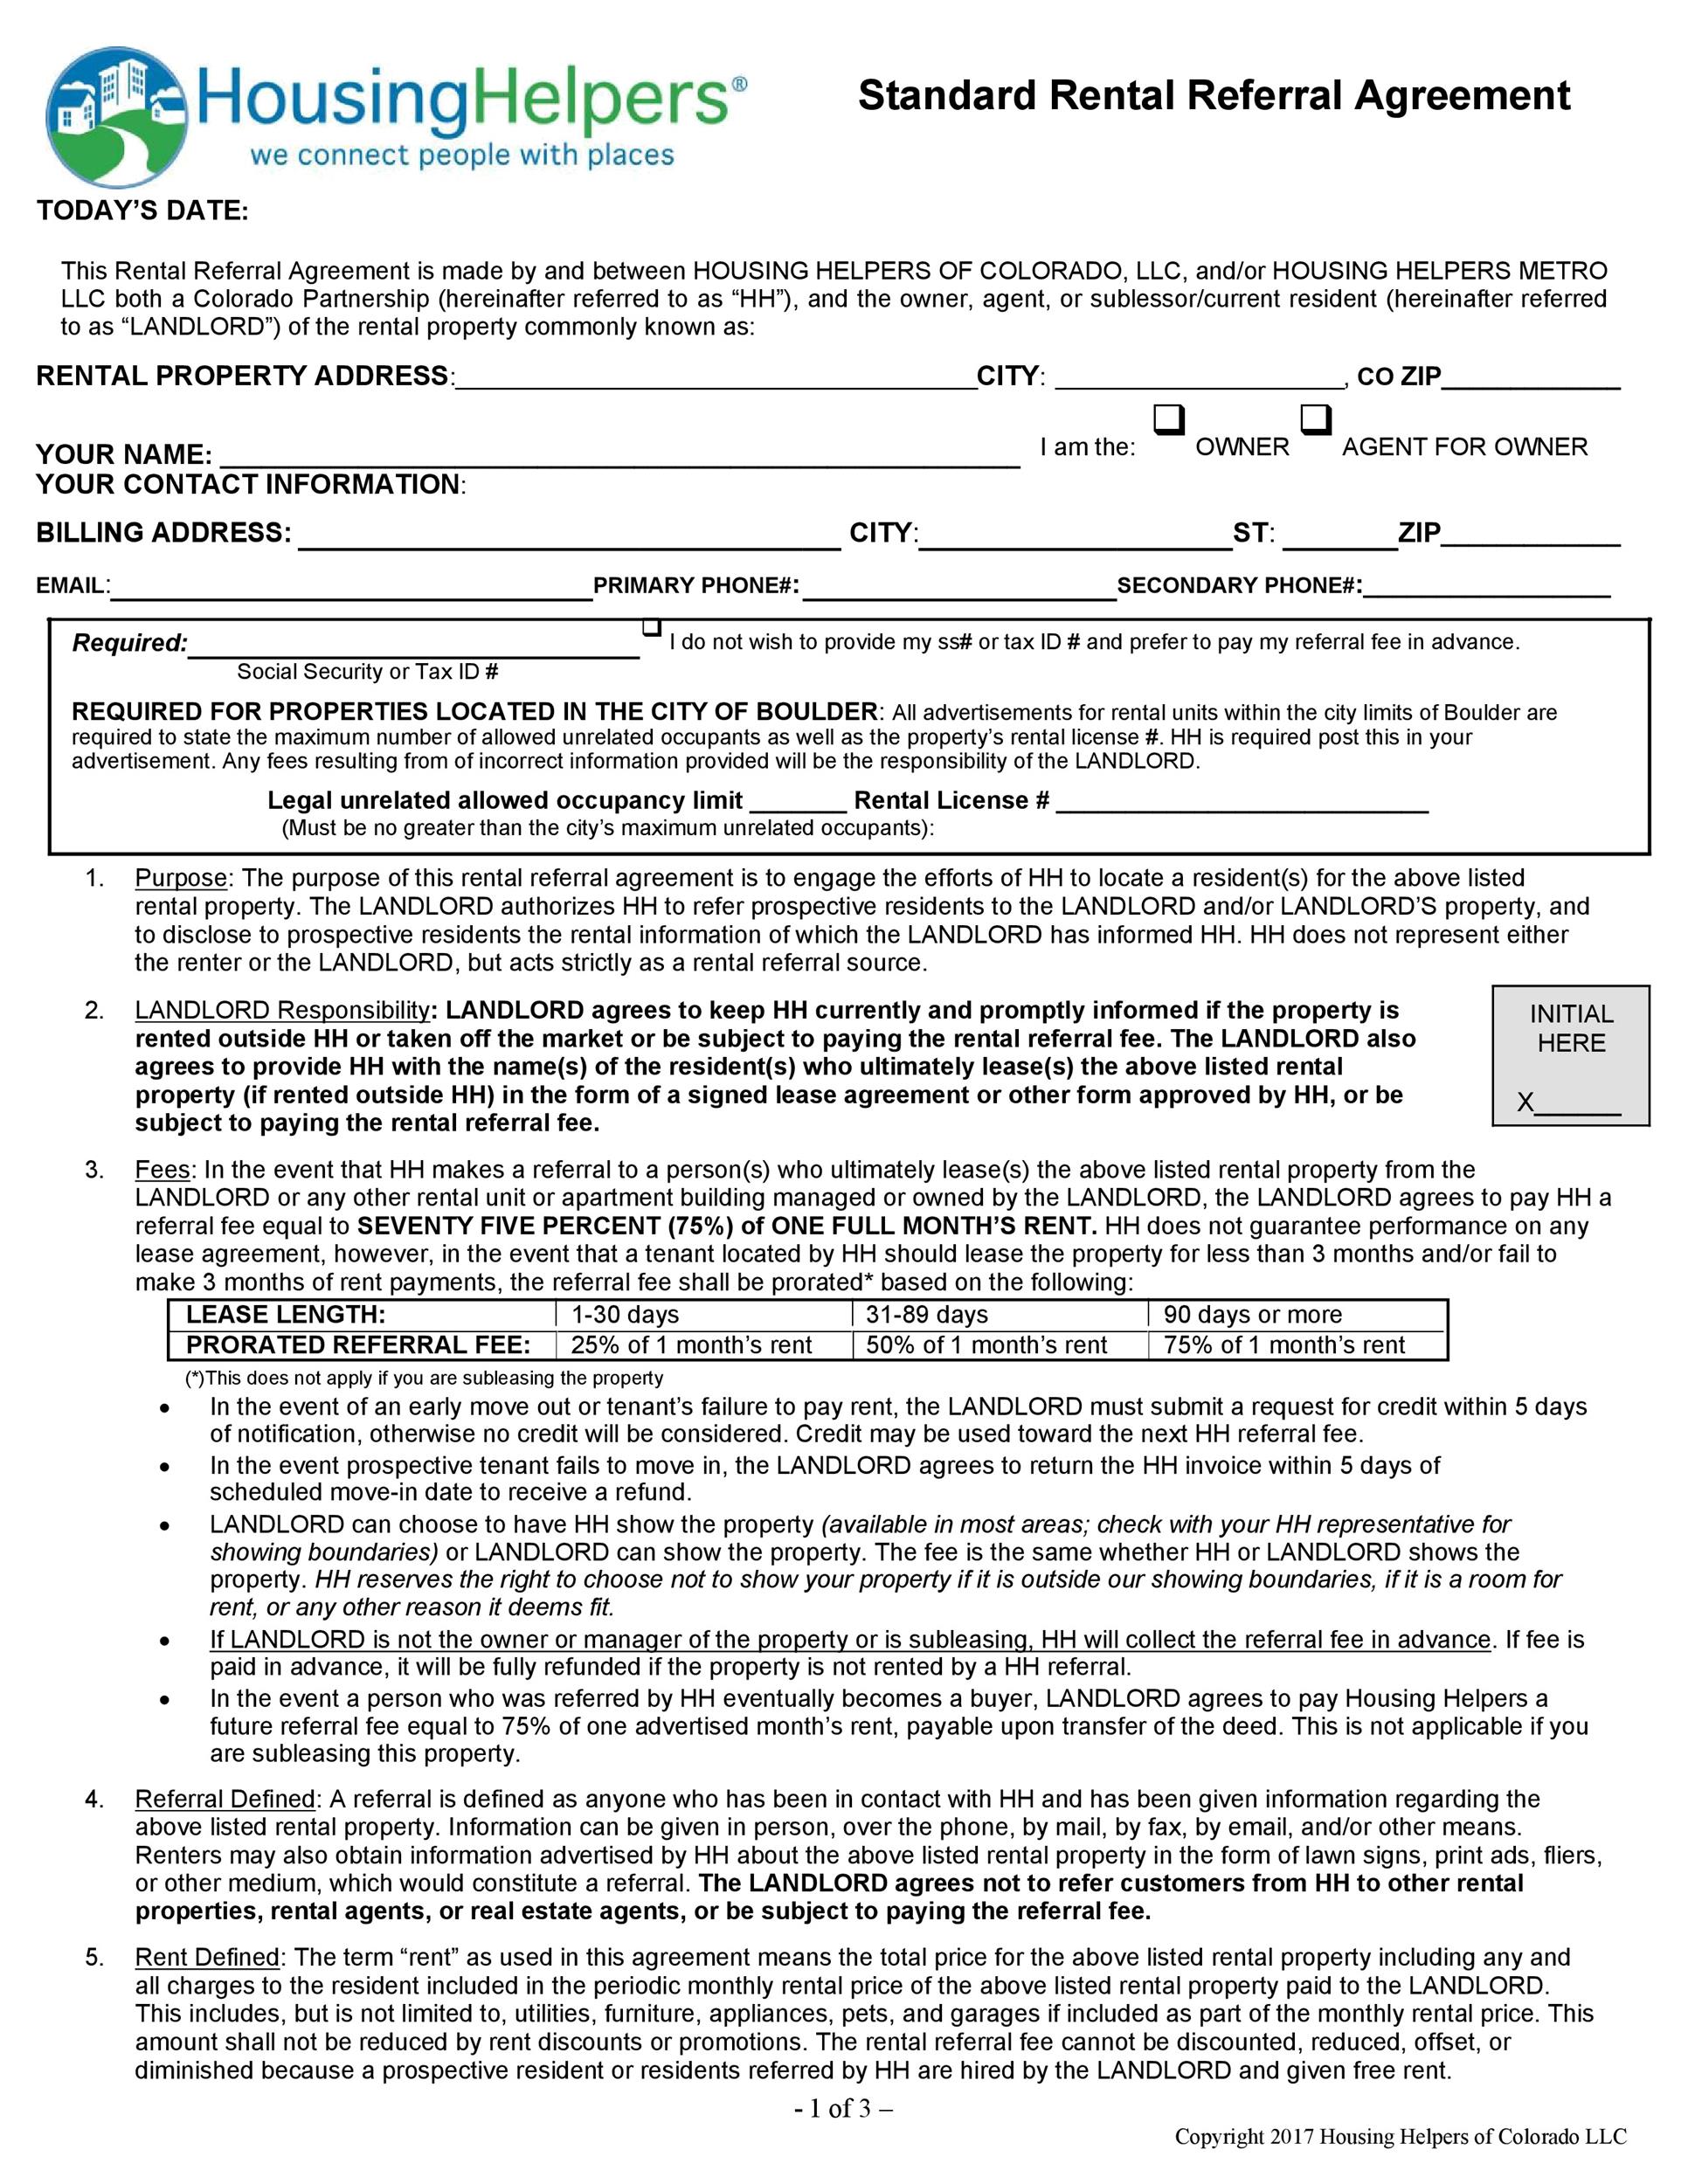 Free referral agreement template 23